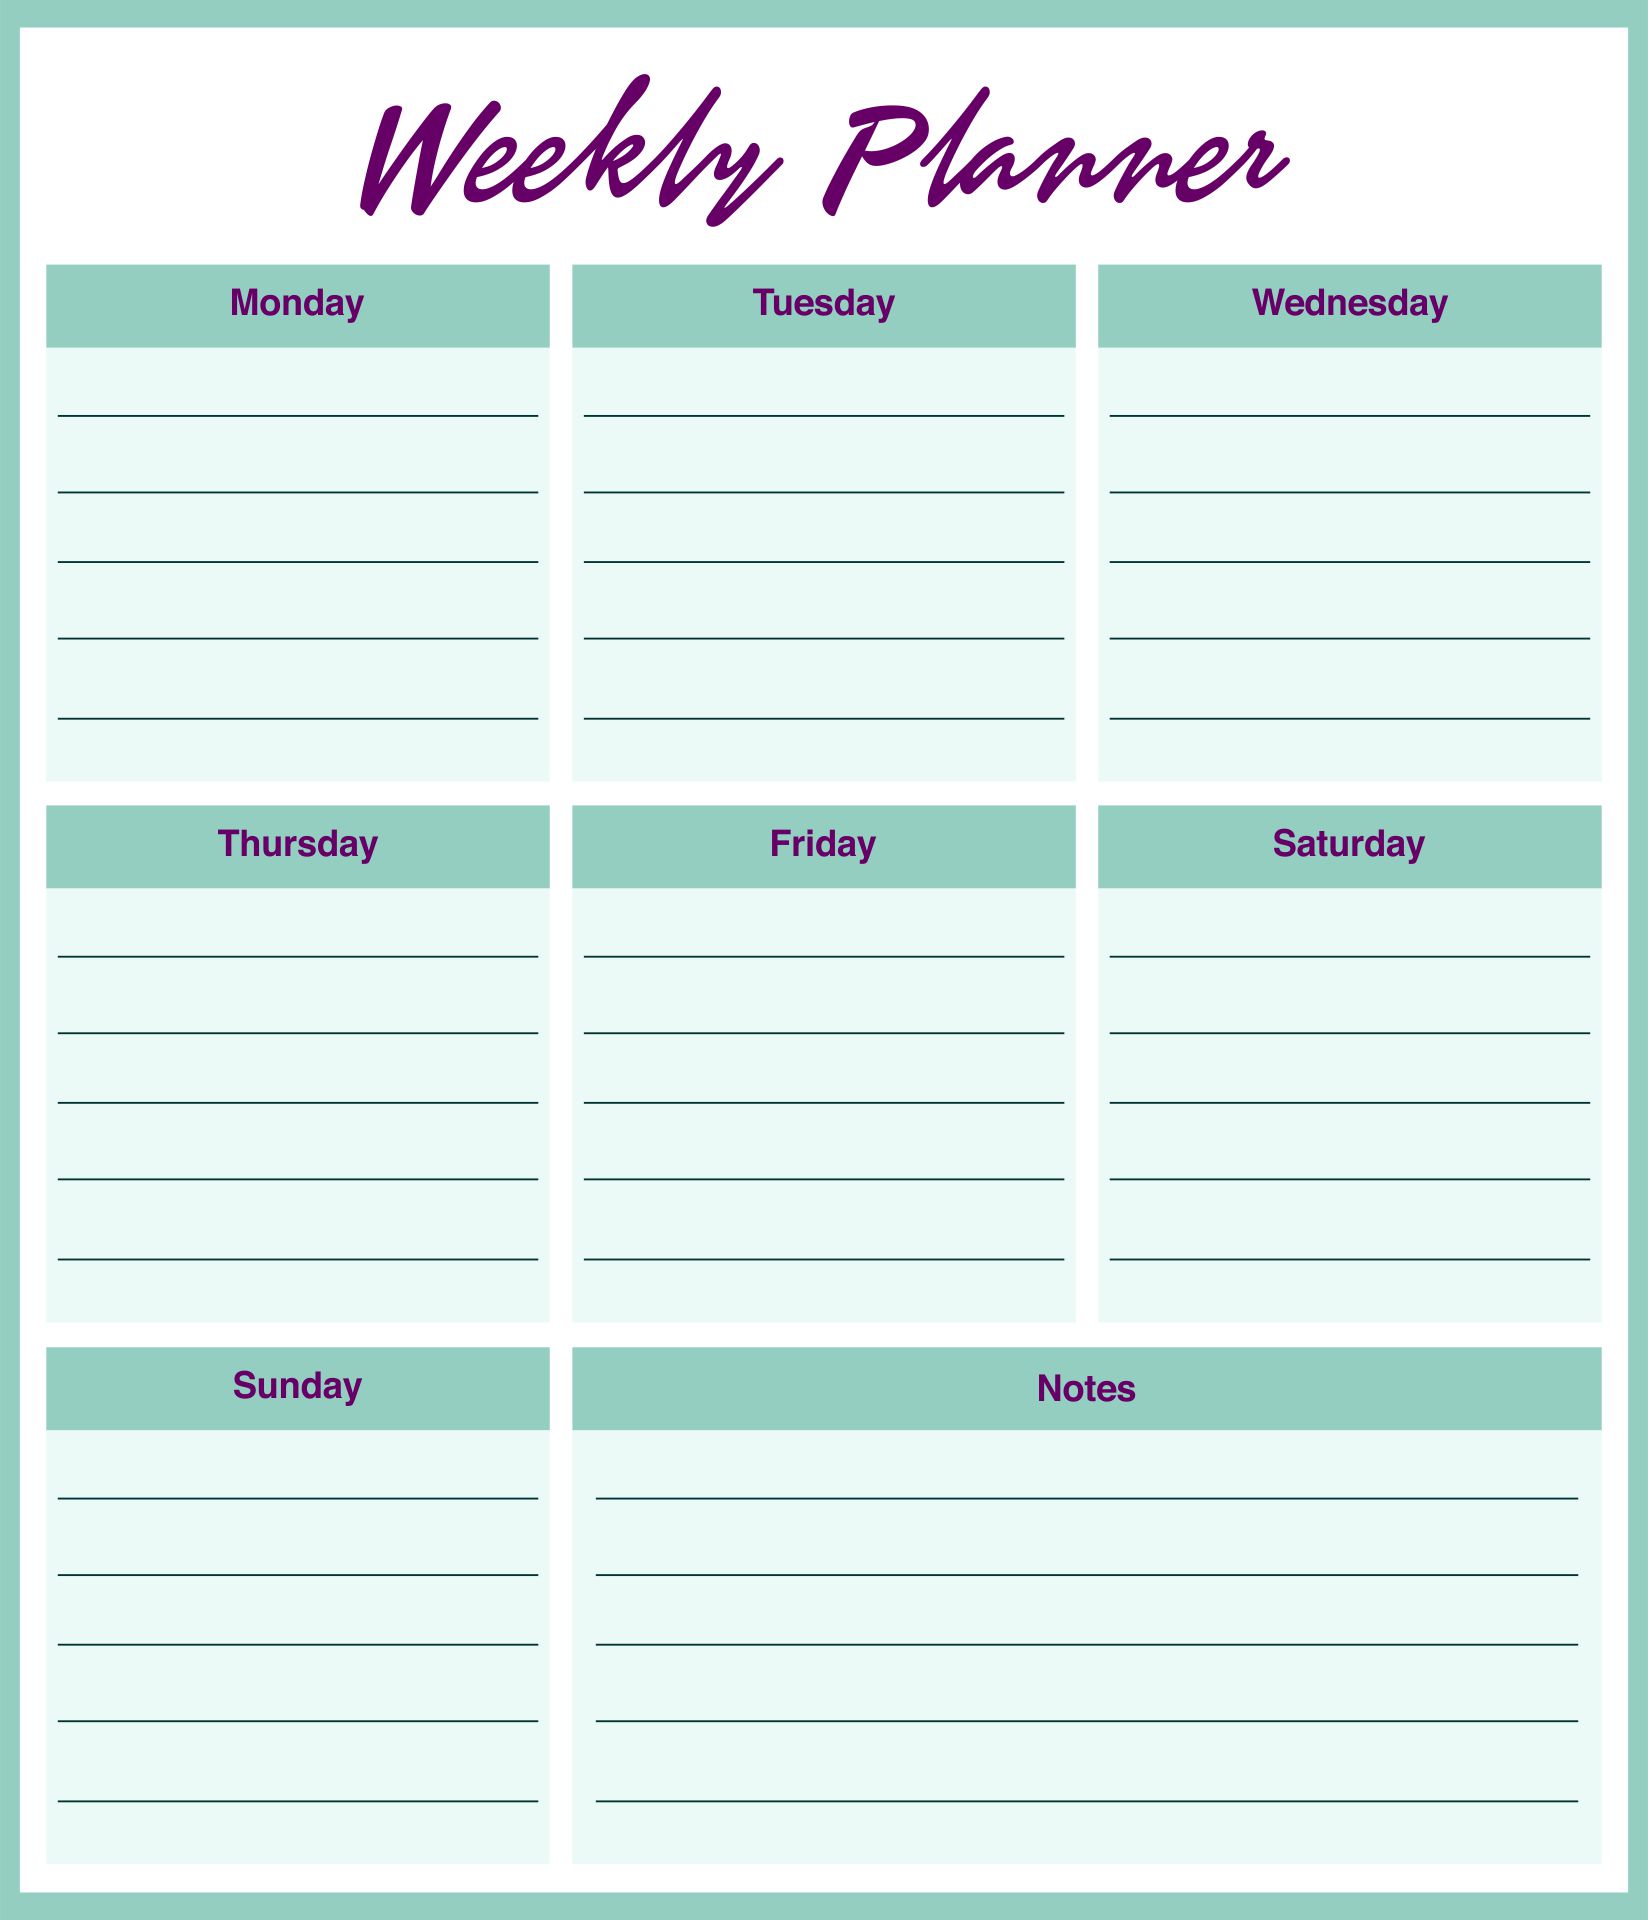 printable-weekly-planner-for-students